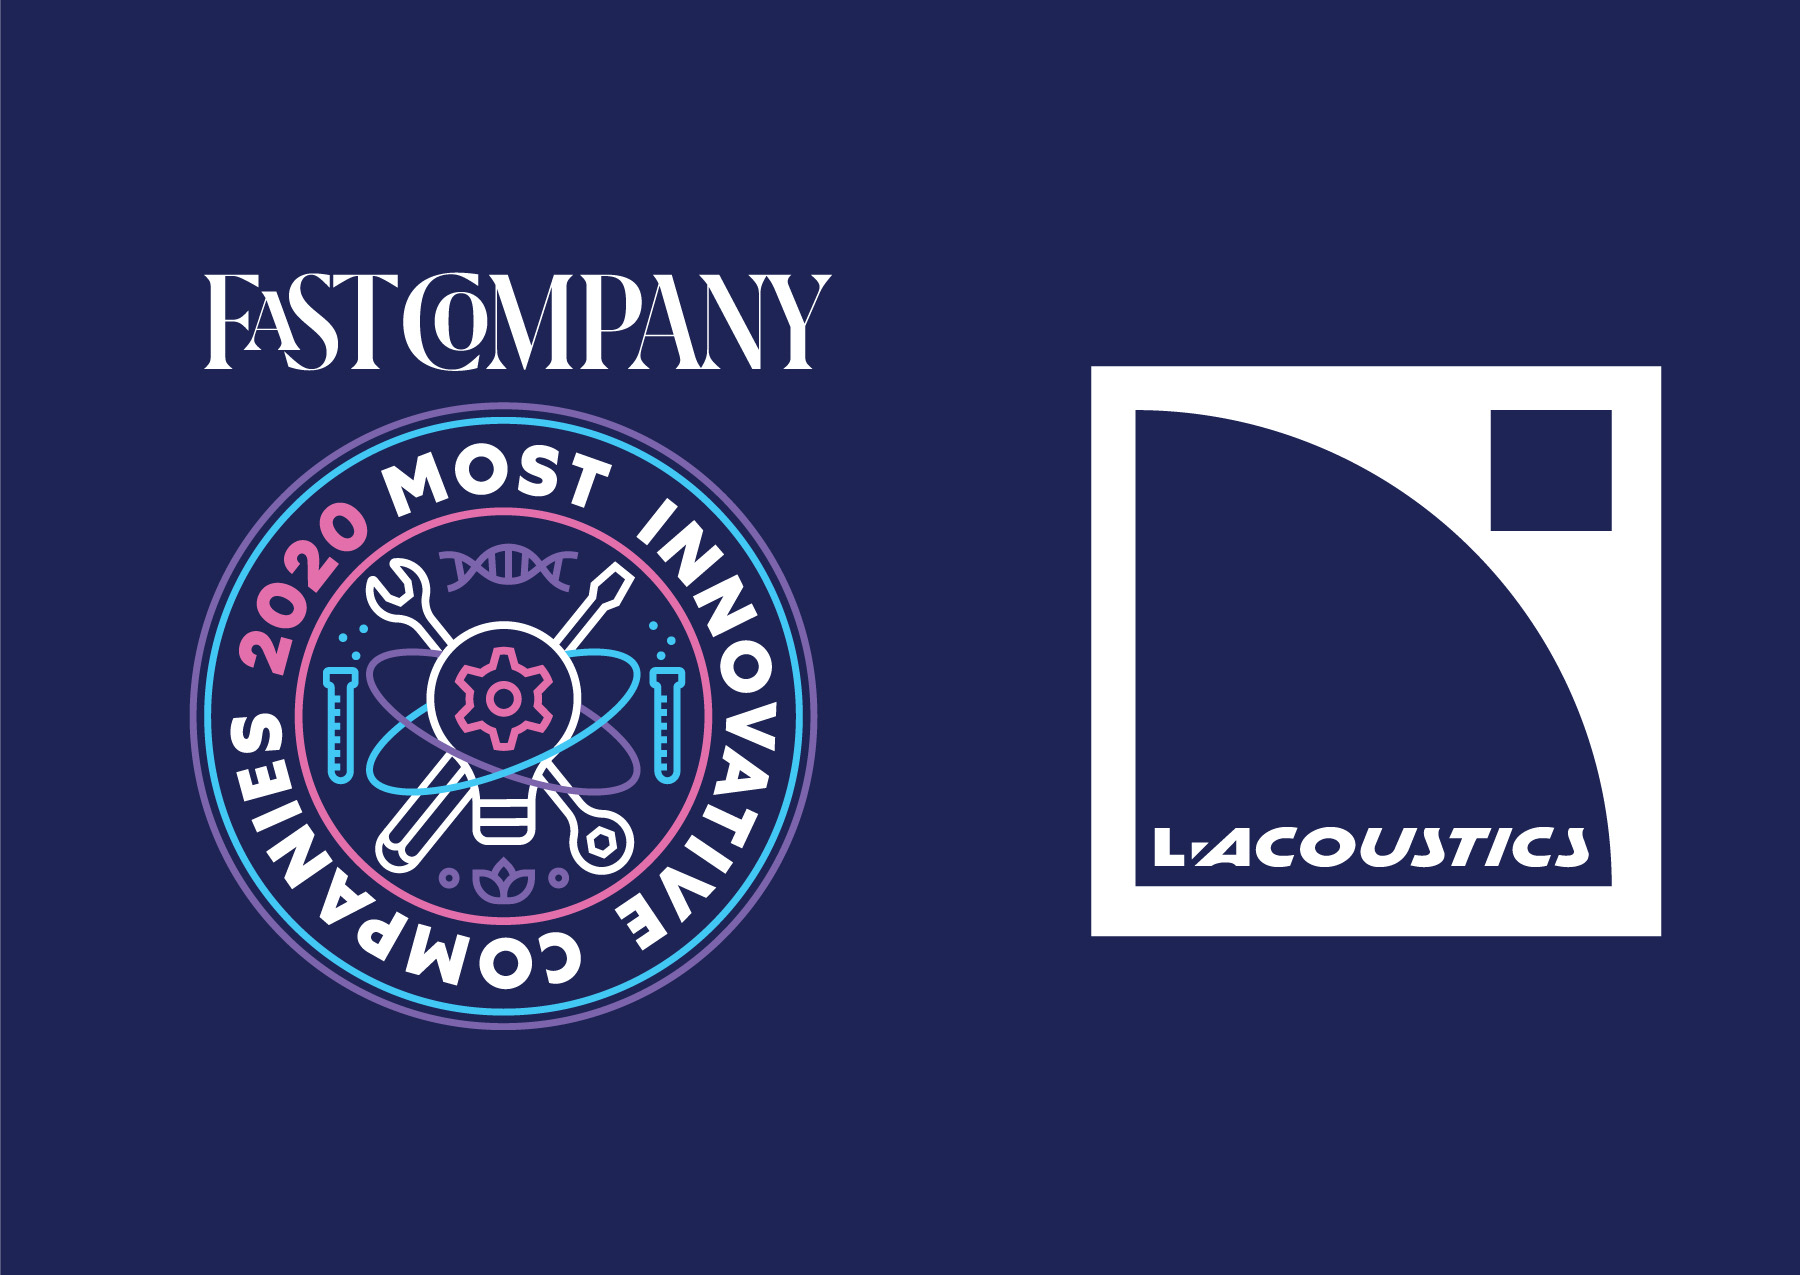 L-Acoustics Named to Fast Company’s Annual List of the World’s Most Innovative Companies for 2020